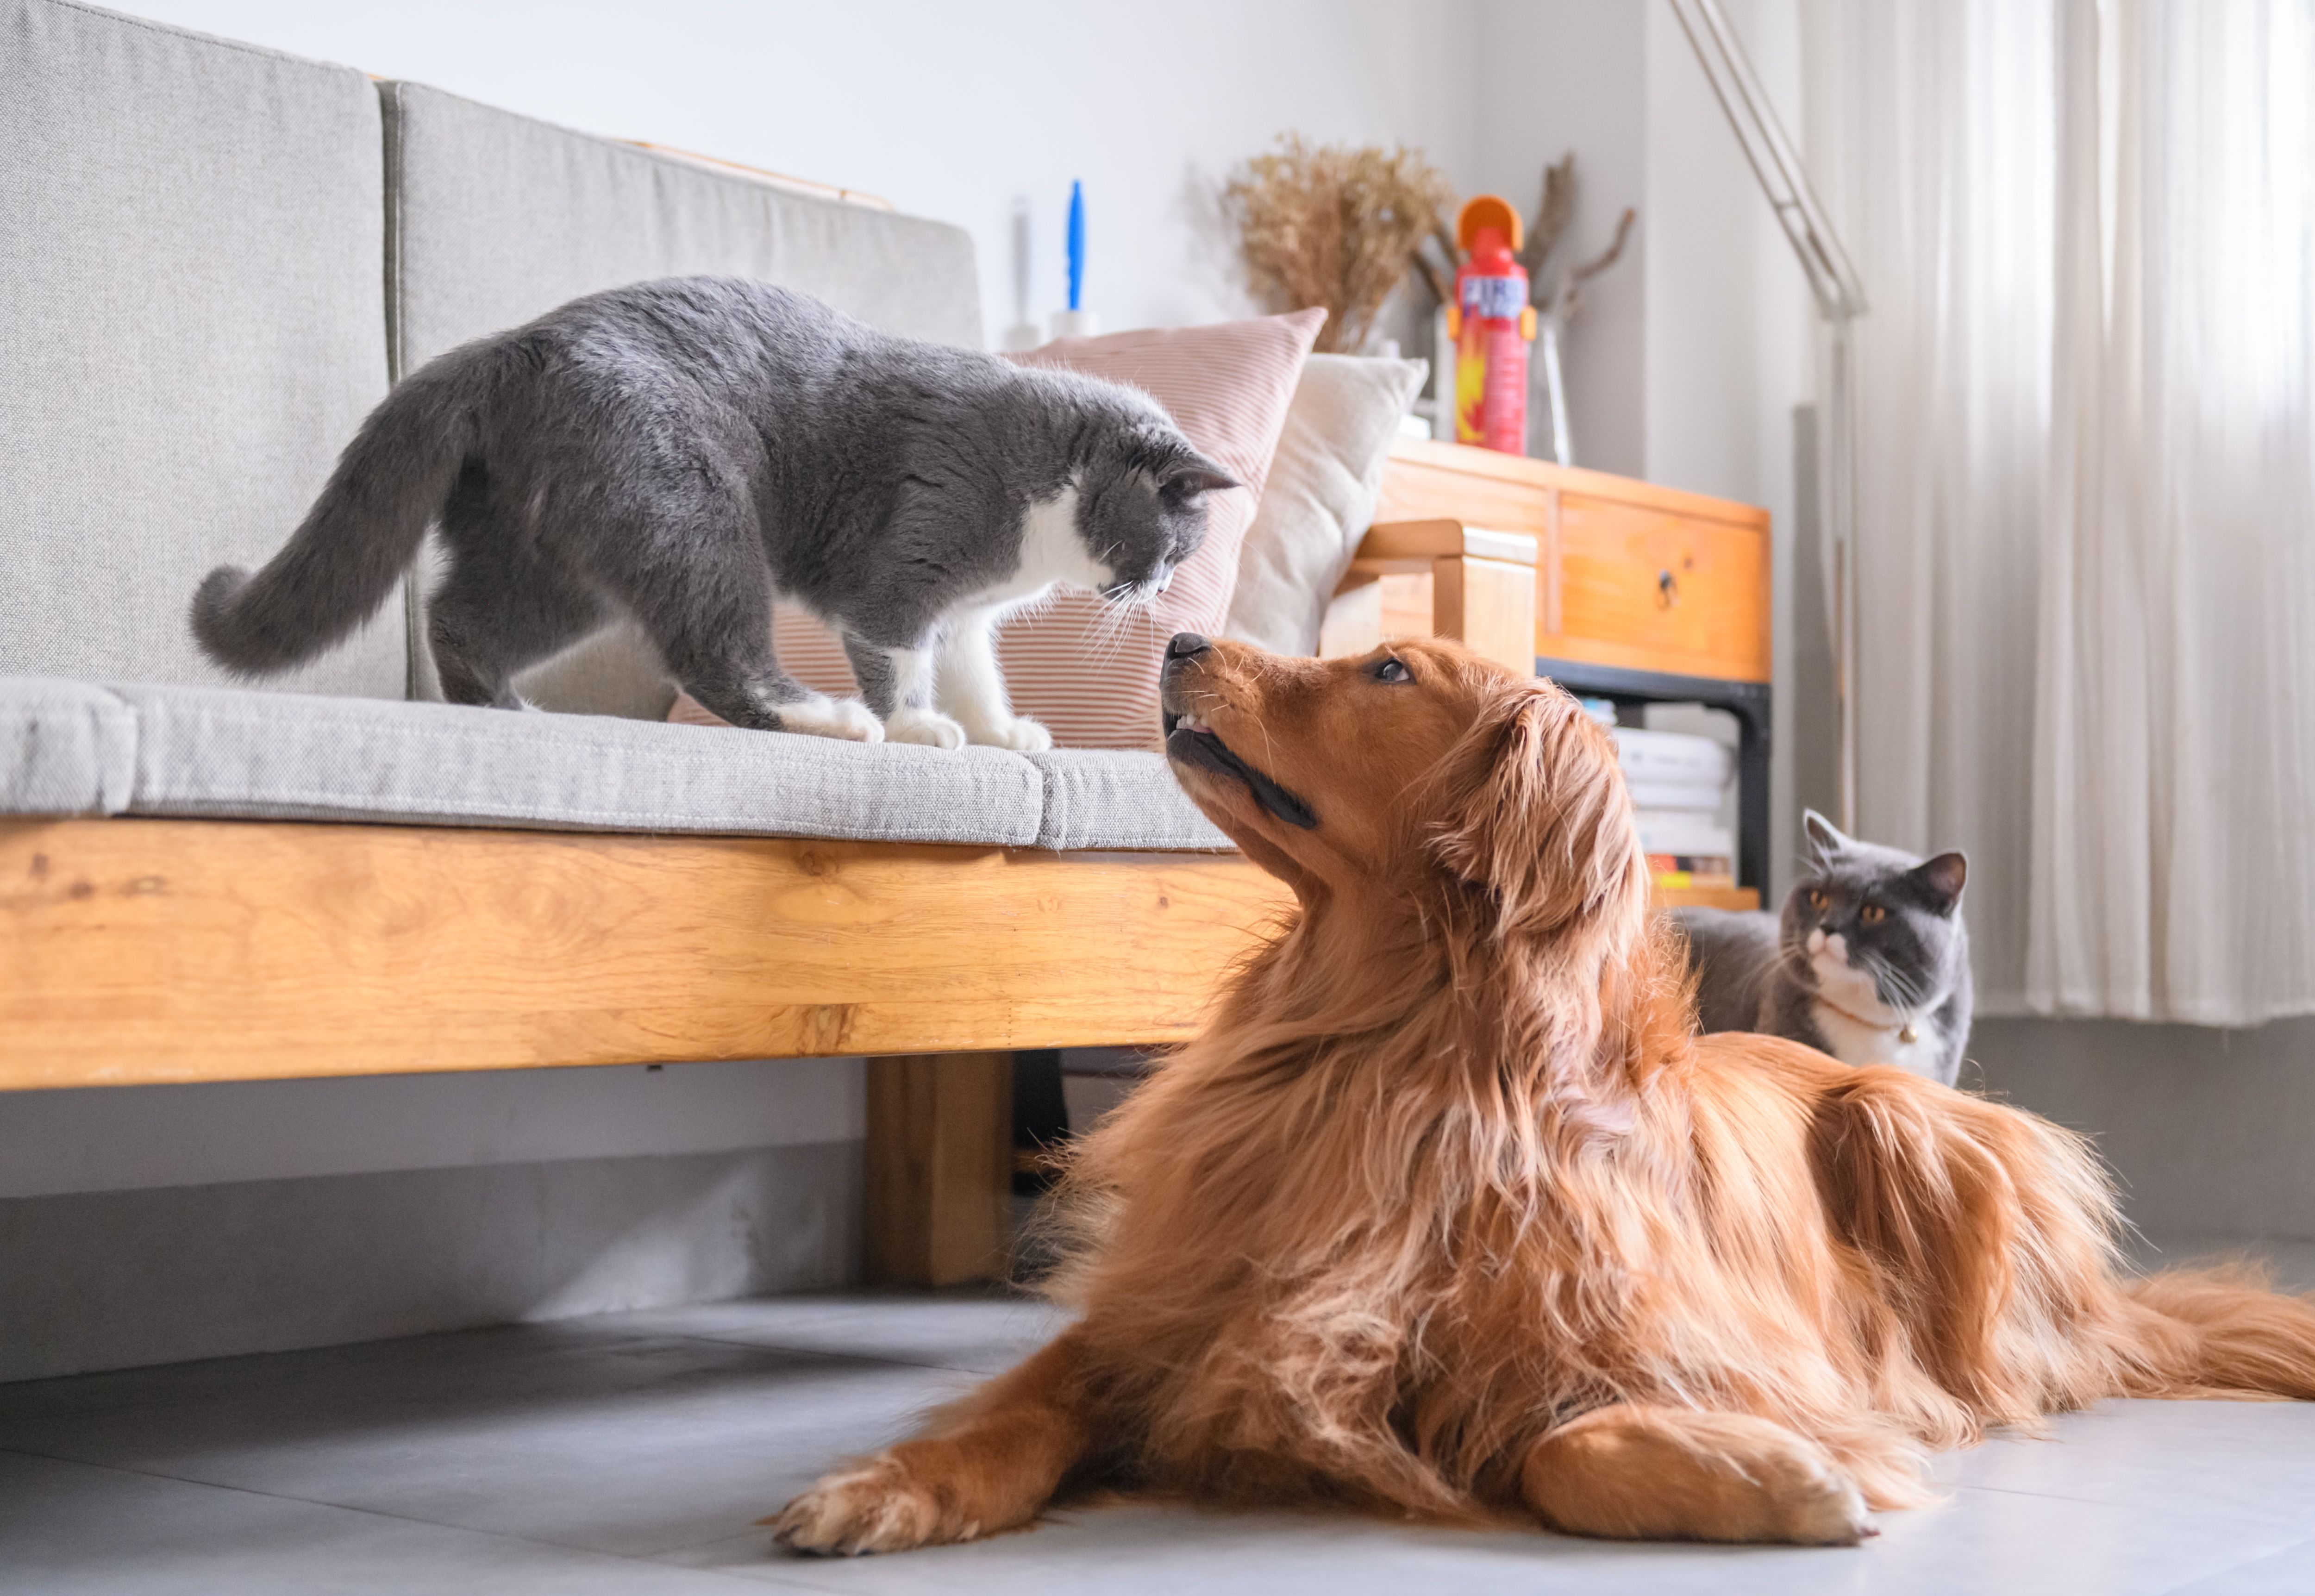 Animal psychology -- what your pet wants you to know - The Washington Post